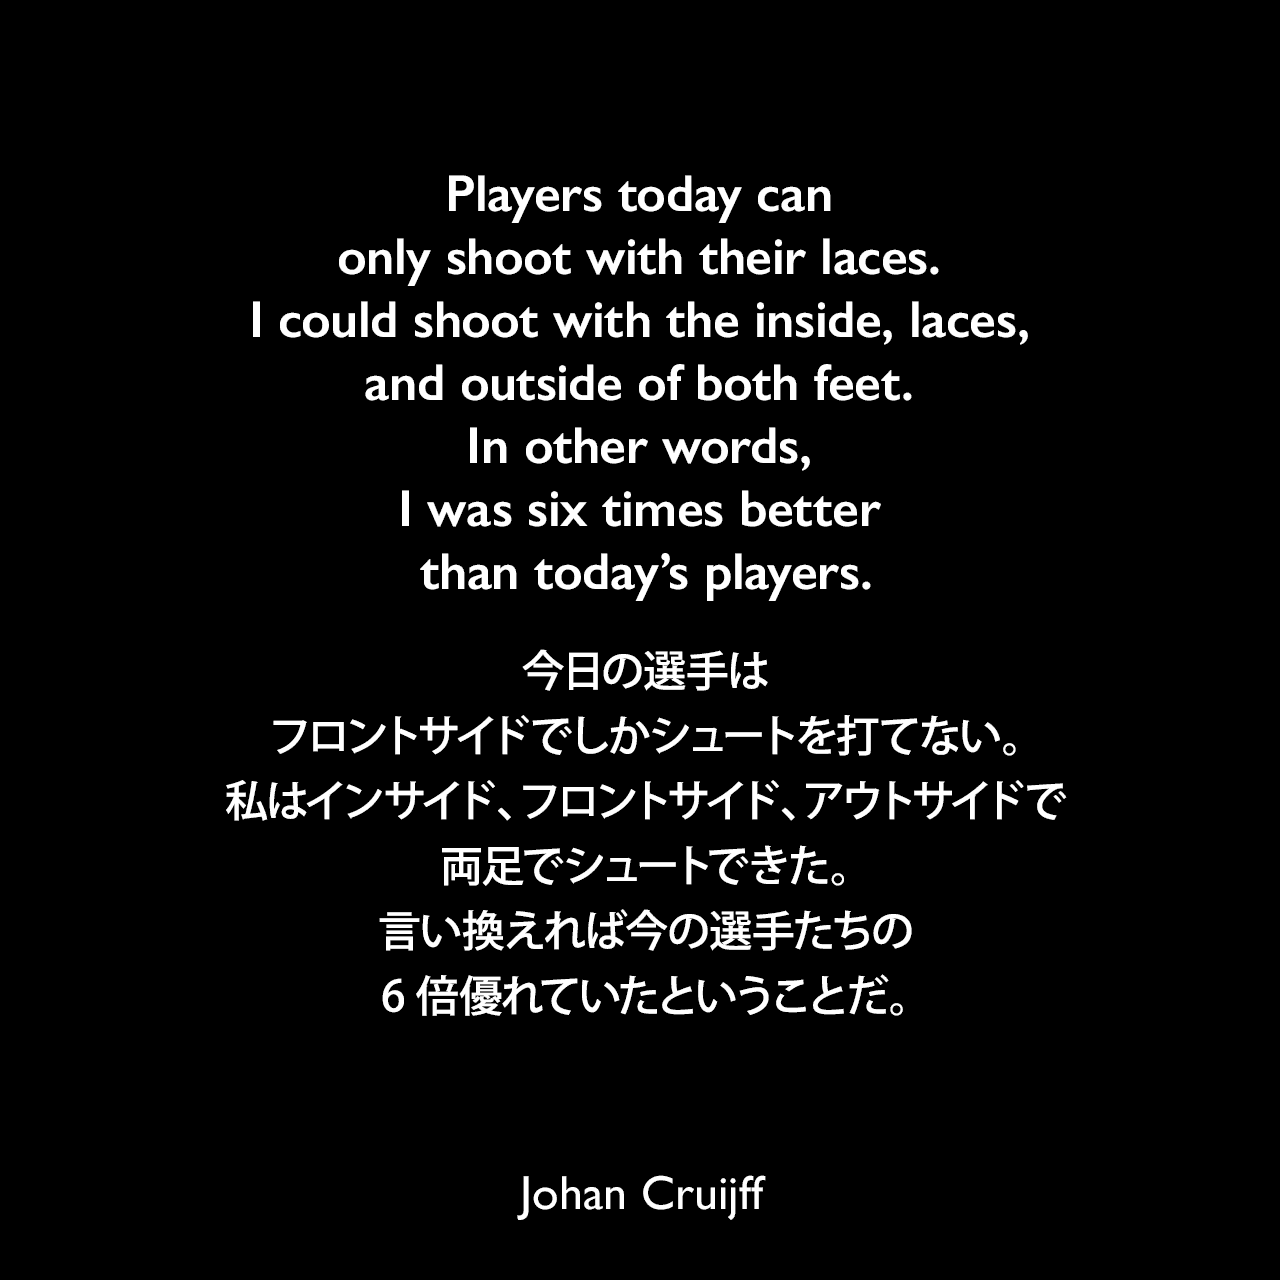 Players today can only shoot with their laces. I could shoot with the inside, laces, and outside of both feet. In other words, I was six times better than today’s players.今日の選手はフロントサイドでしかシュートを打てない。私はインサイド、フロントサイド、アウトサイドで両足でシュートできた。言い換えれば今の選手たちの6倍優れていたということだ。Johan Cruijff